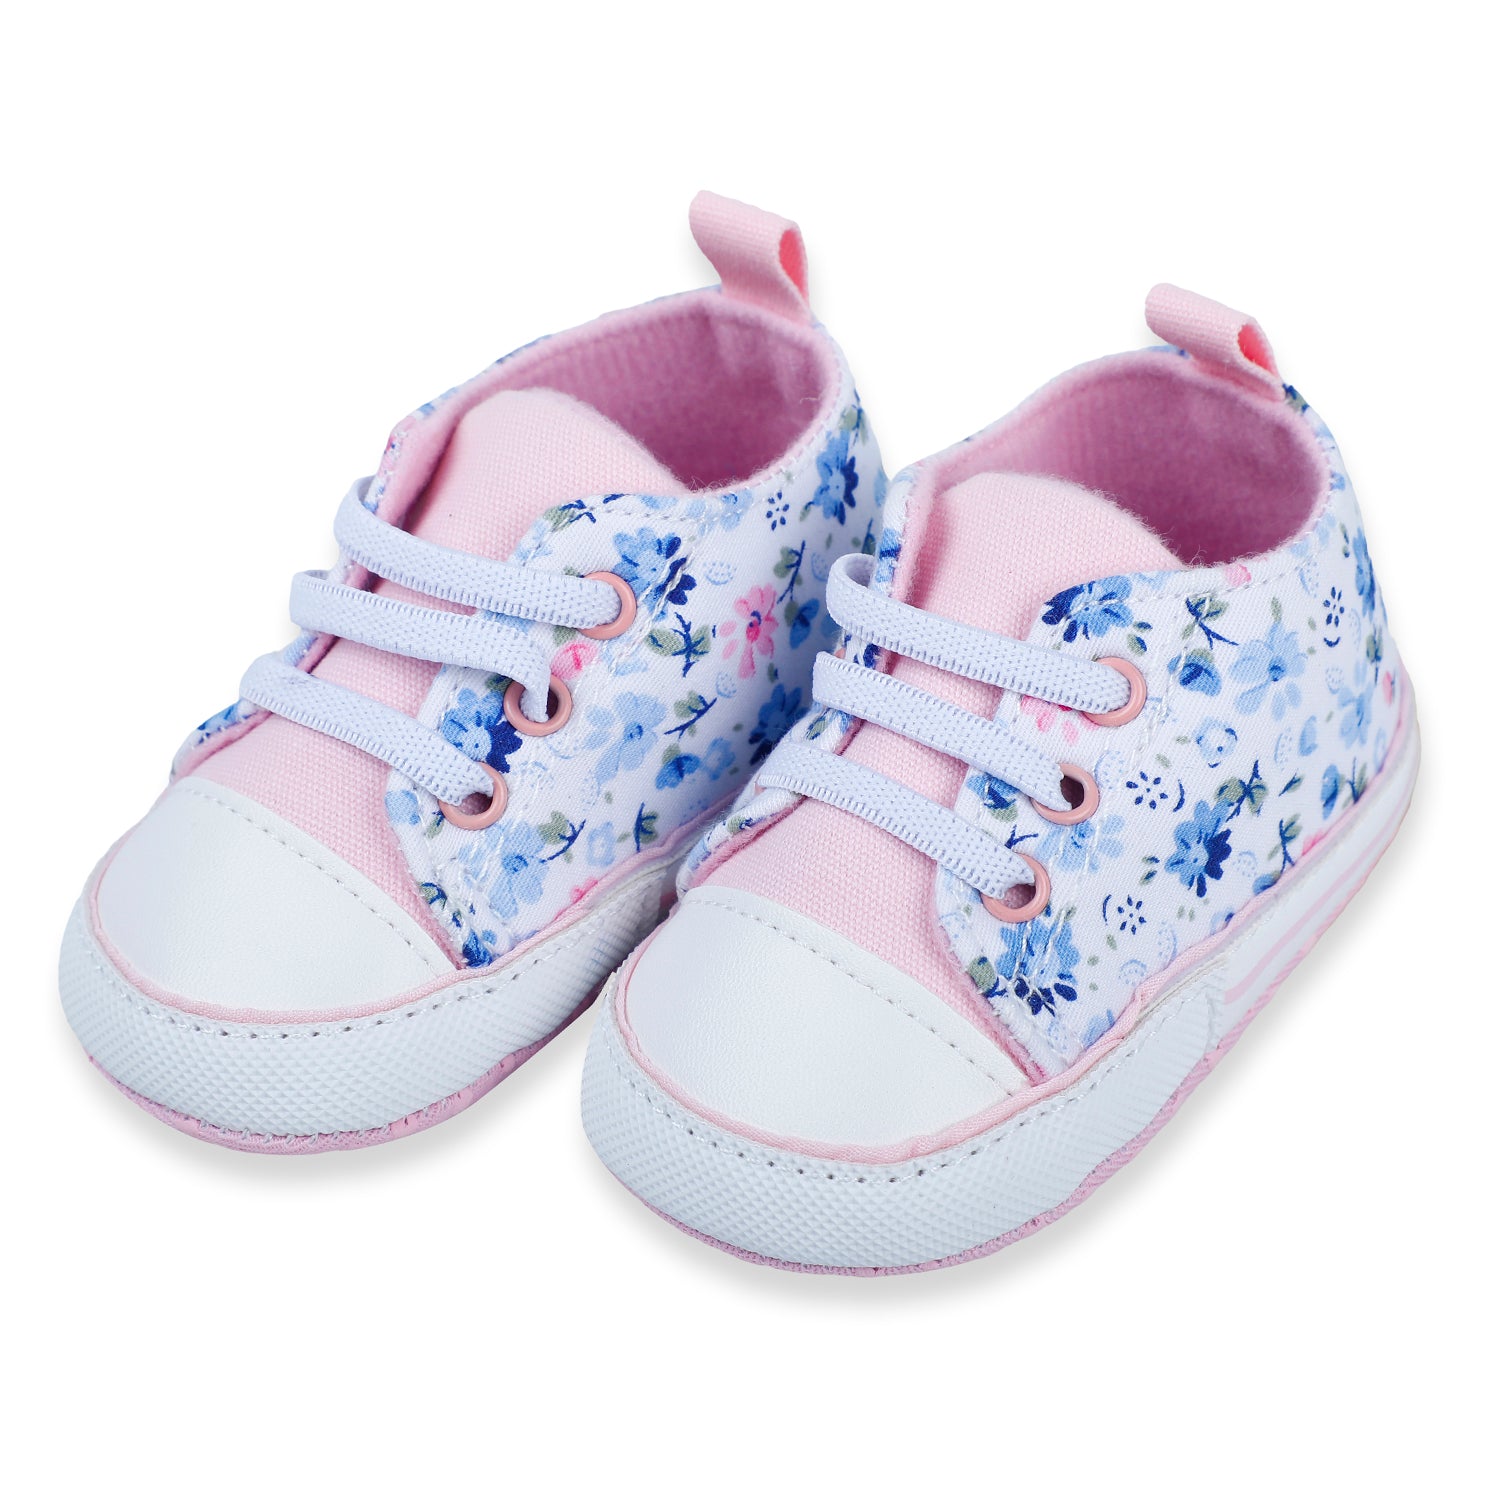 Baby Moo Floral Print Pink Lace Up Booties - Baby Moo